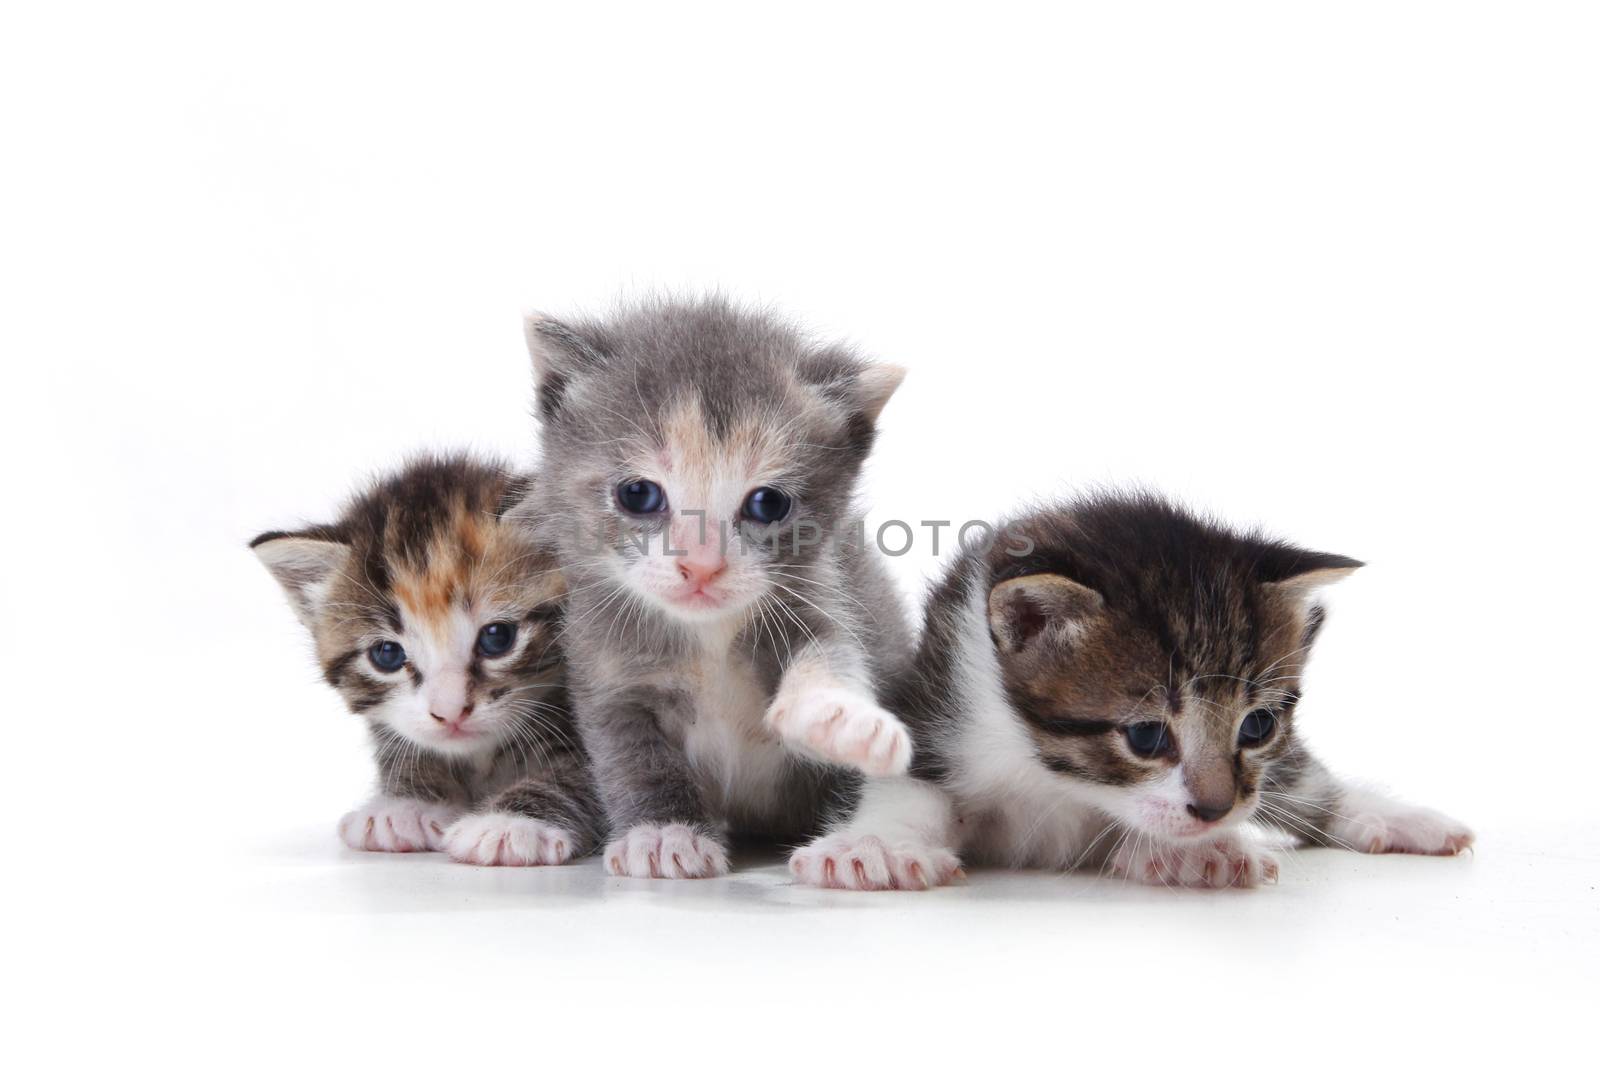 Three Adorable Newborn Kittens on a White Background